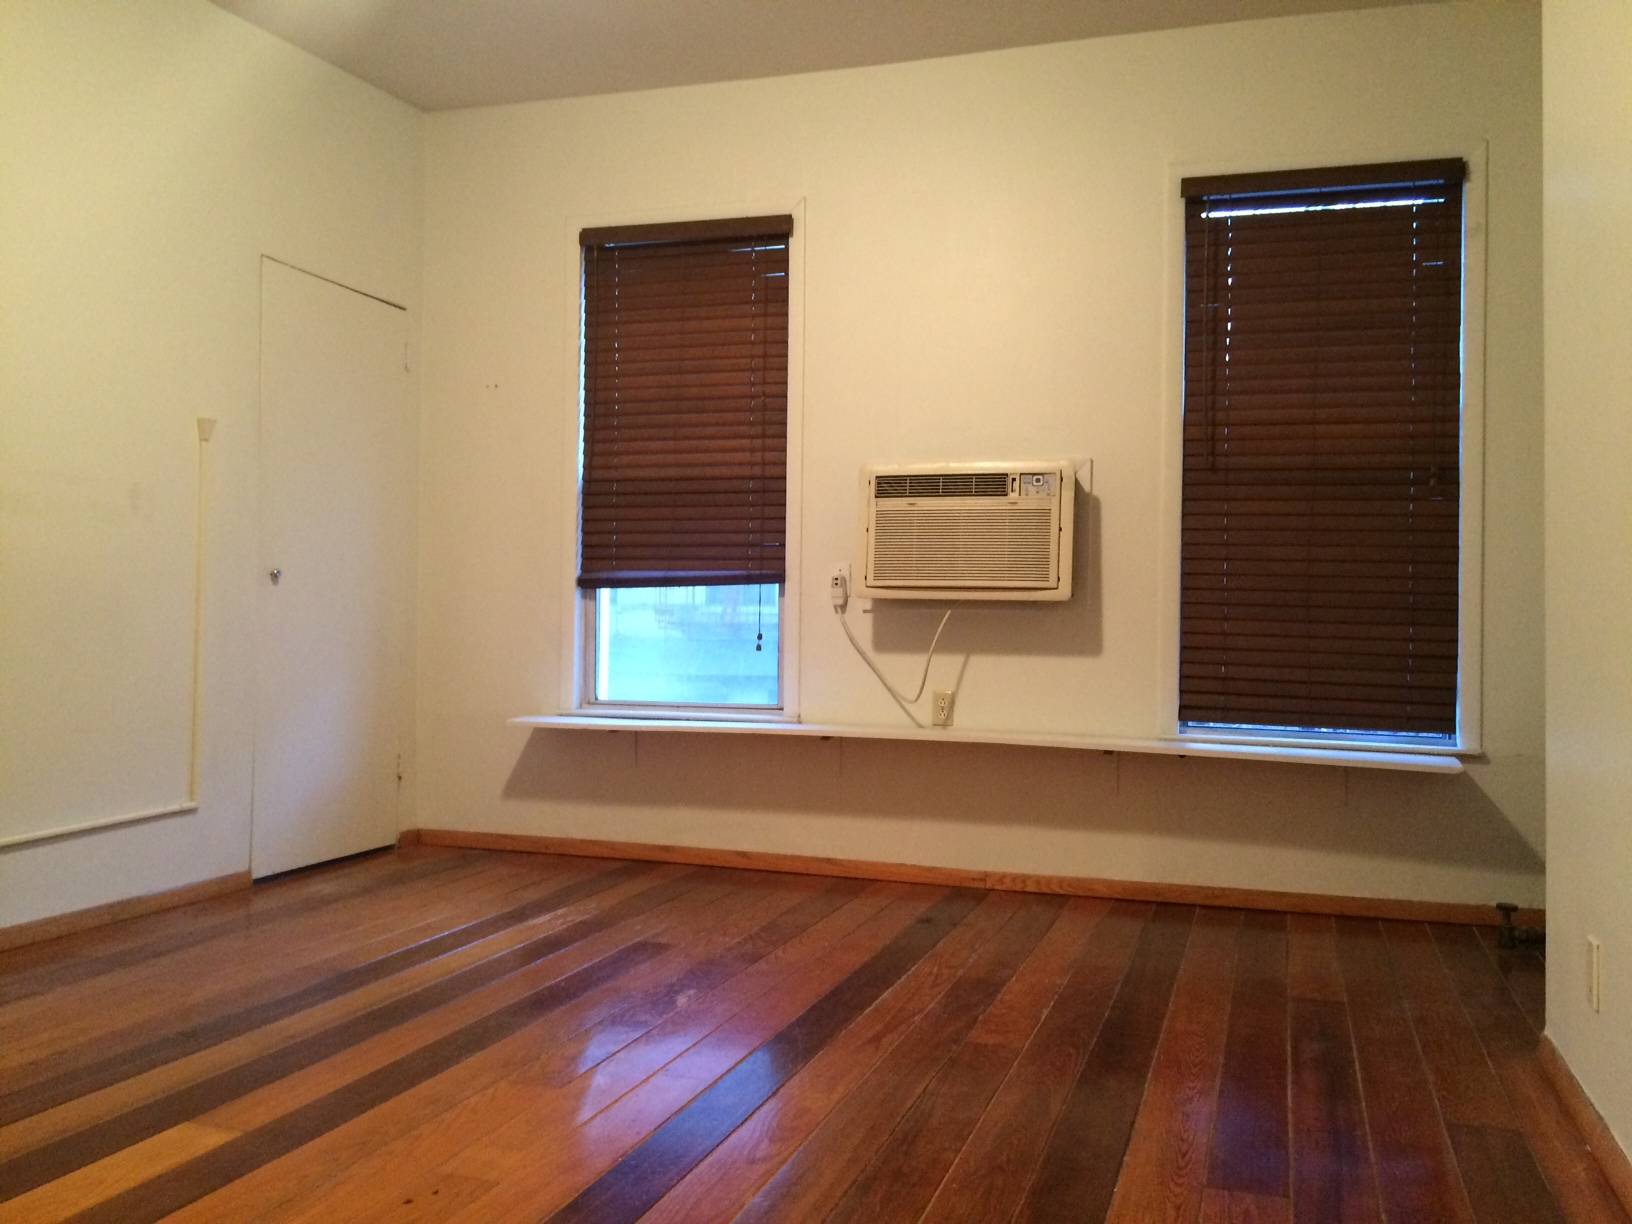 2 Bedroom | 1 Bath in Greenpoint near McCarren Park with Outdoor Space